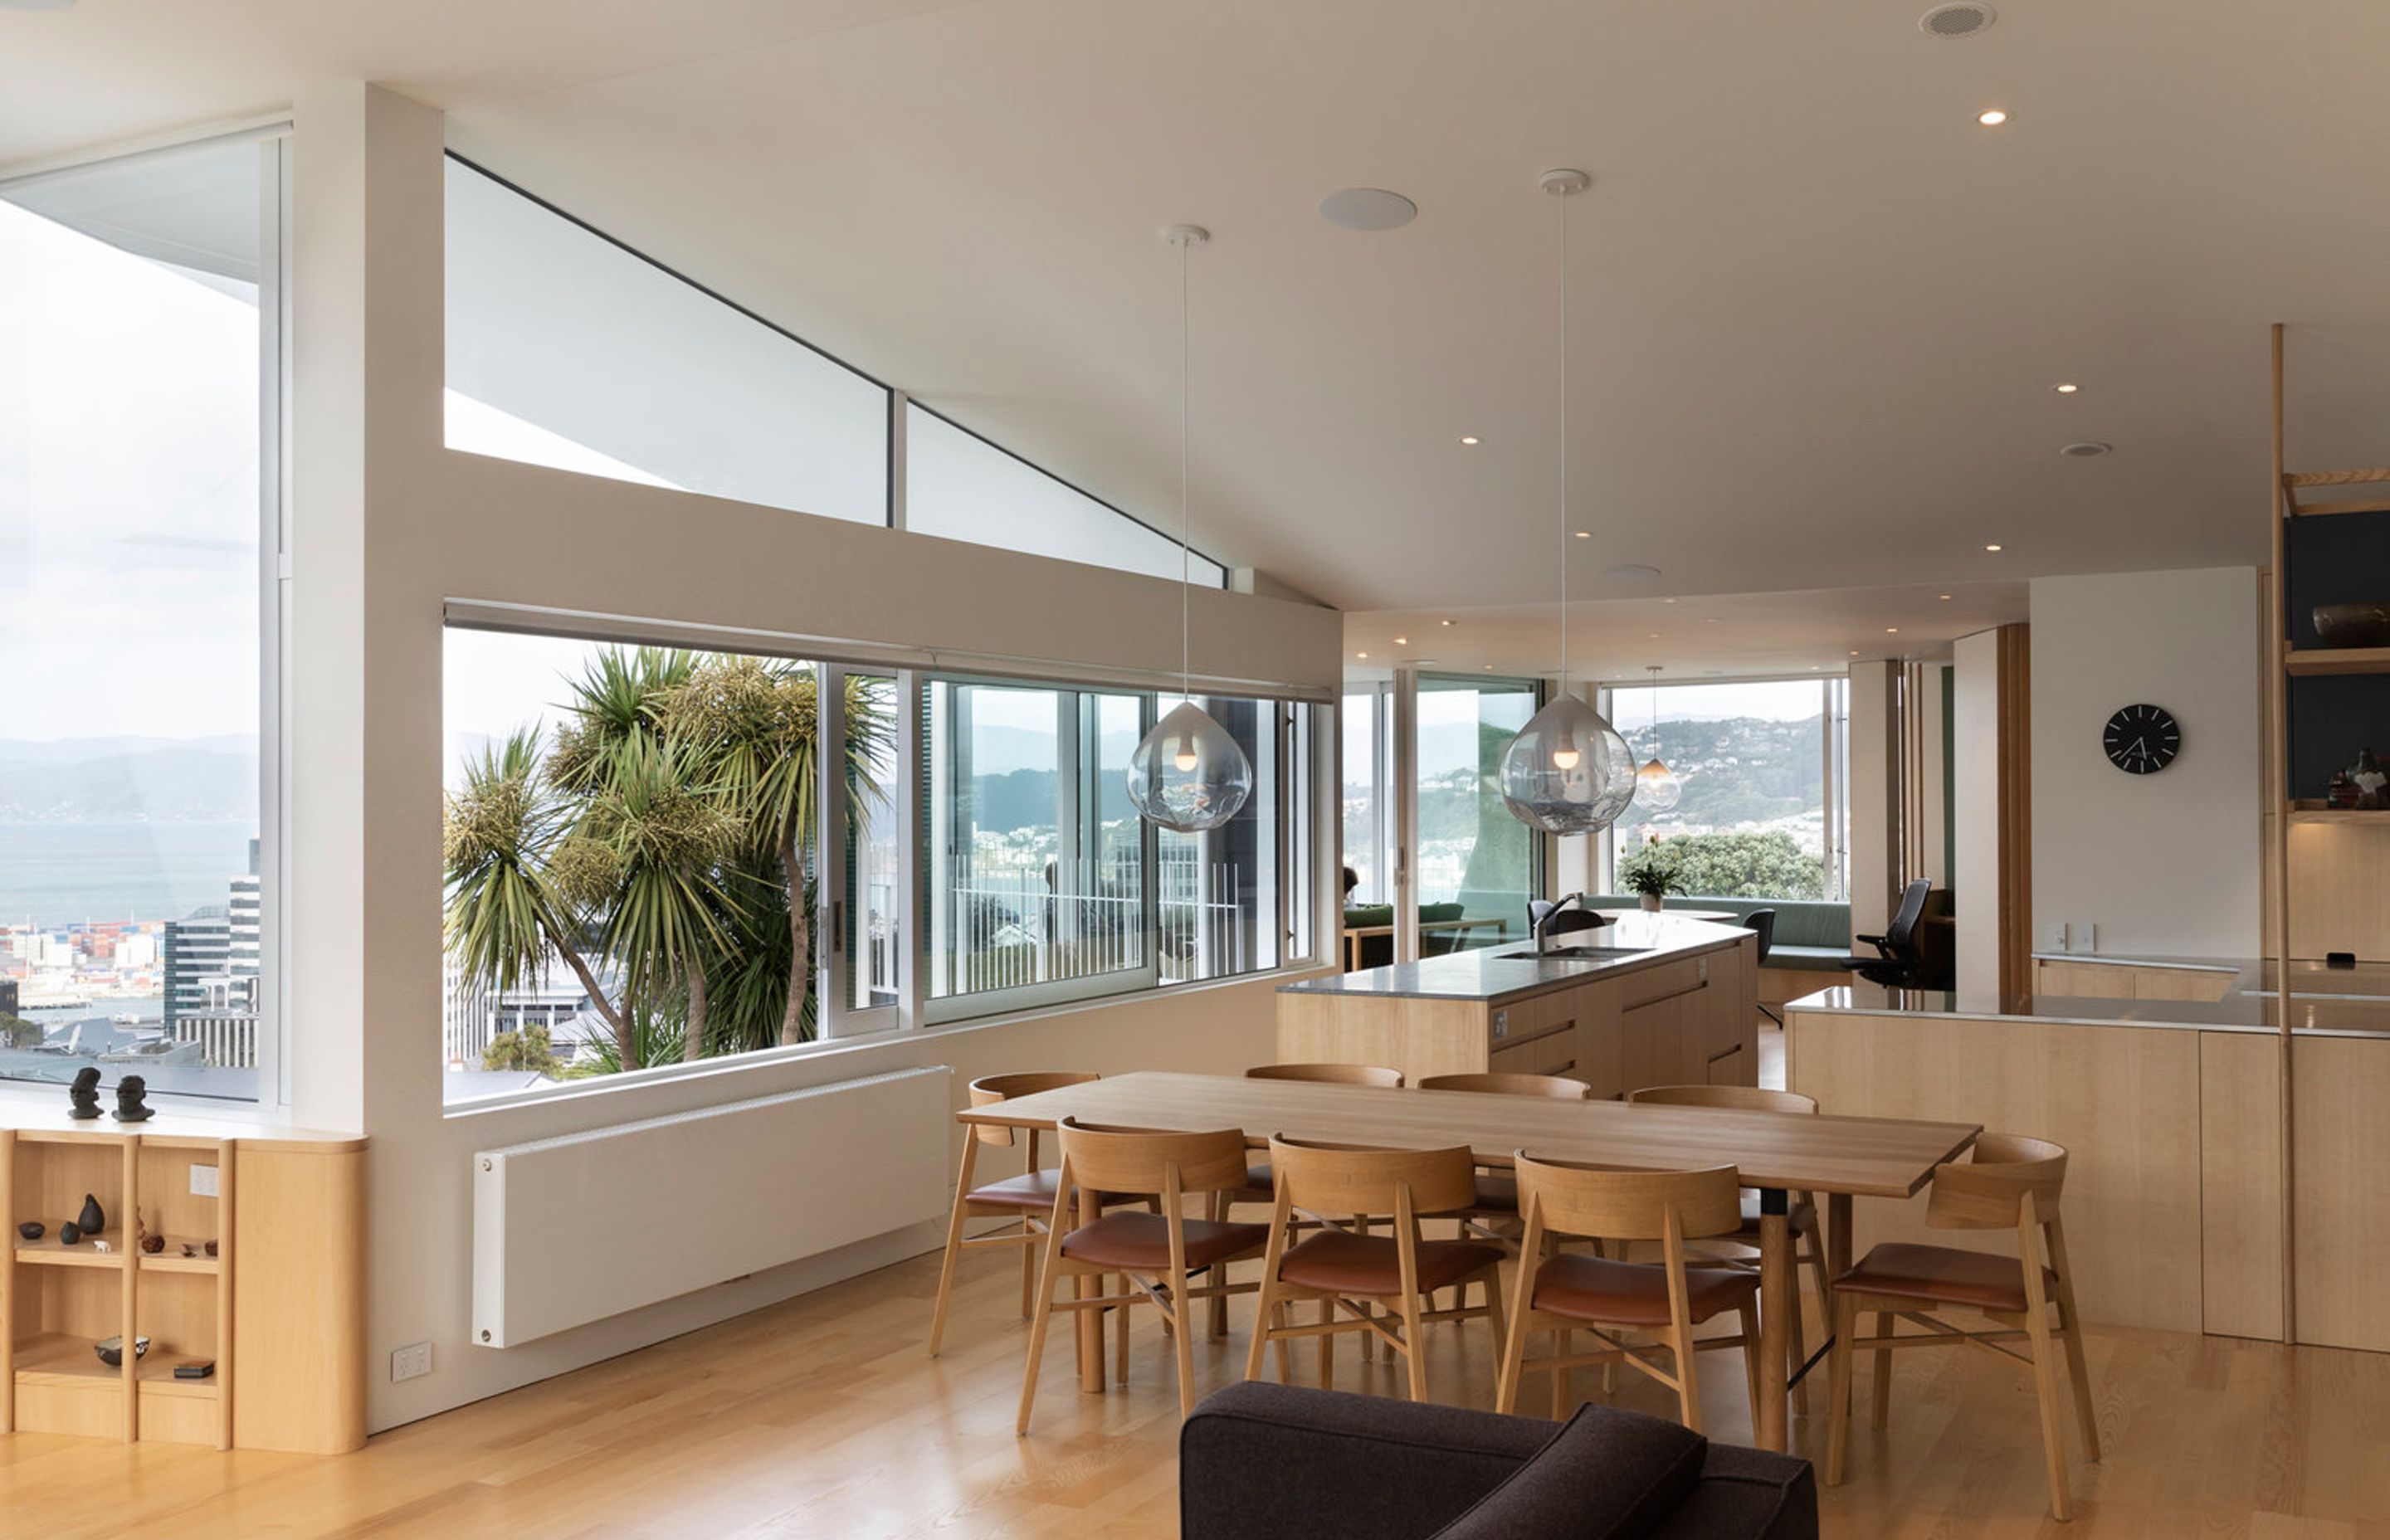 The dining area and kitchen area has a curved plan to take in the panoramic view over Wellington city and harbour.